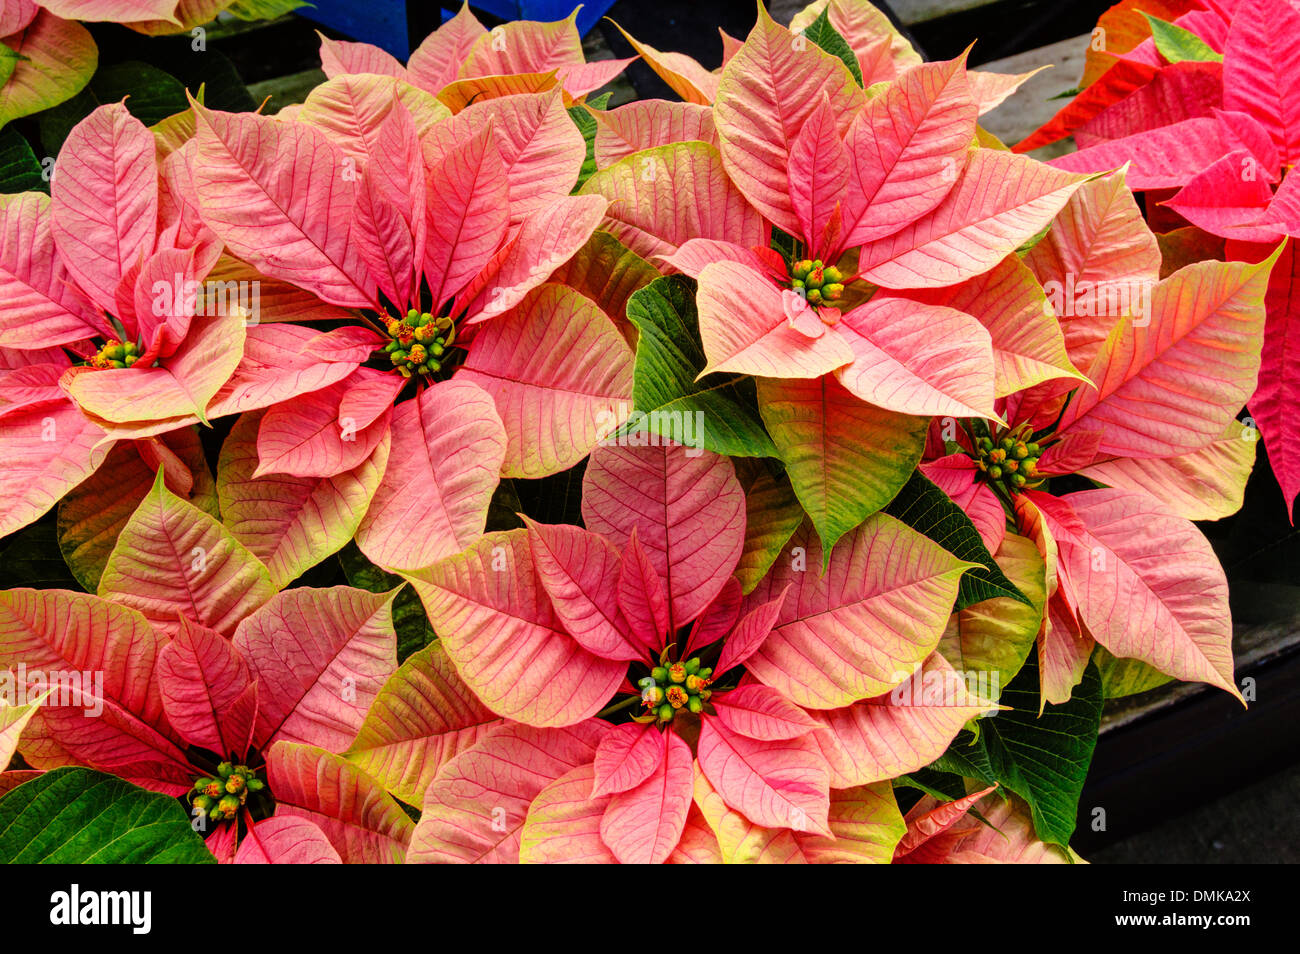 Poinsettia Plants In Bloom Used As Traditional Christmas